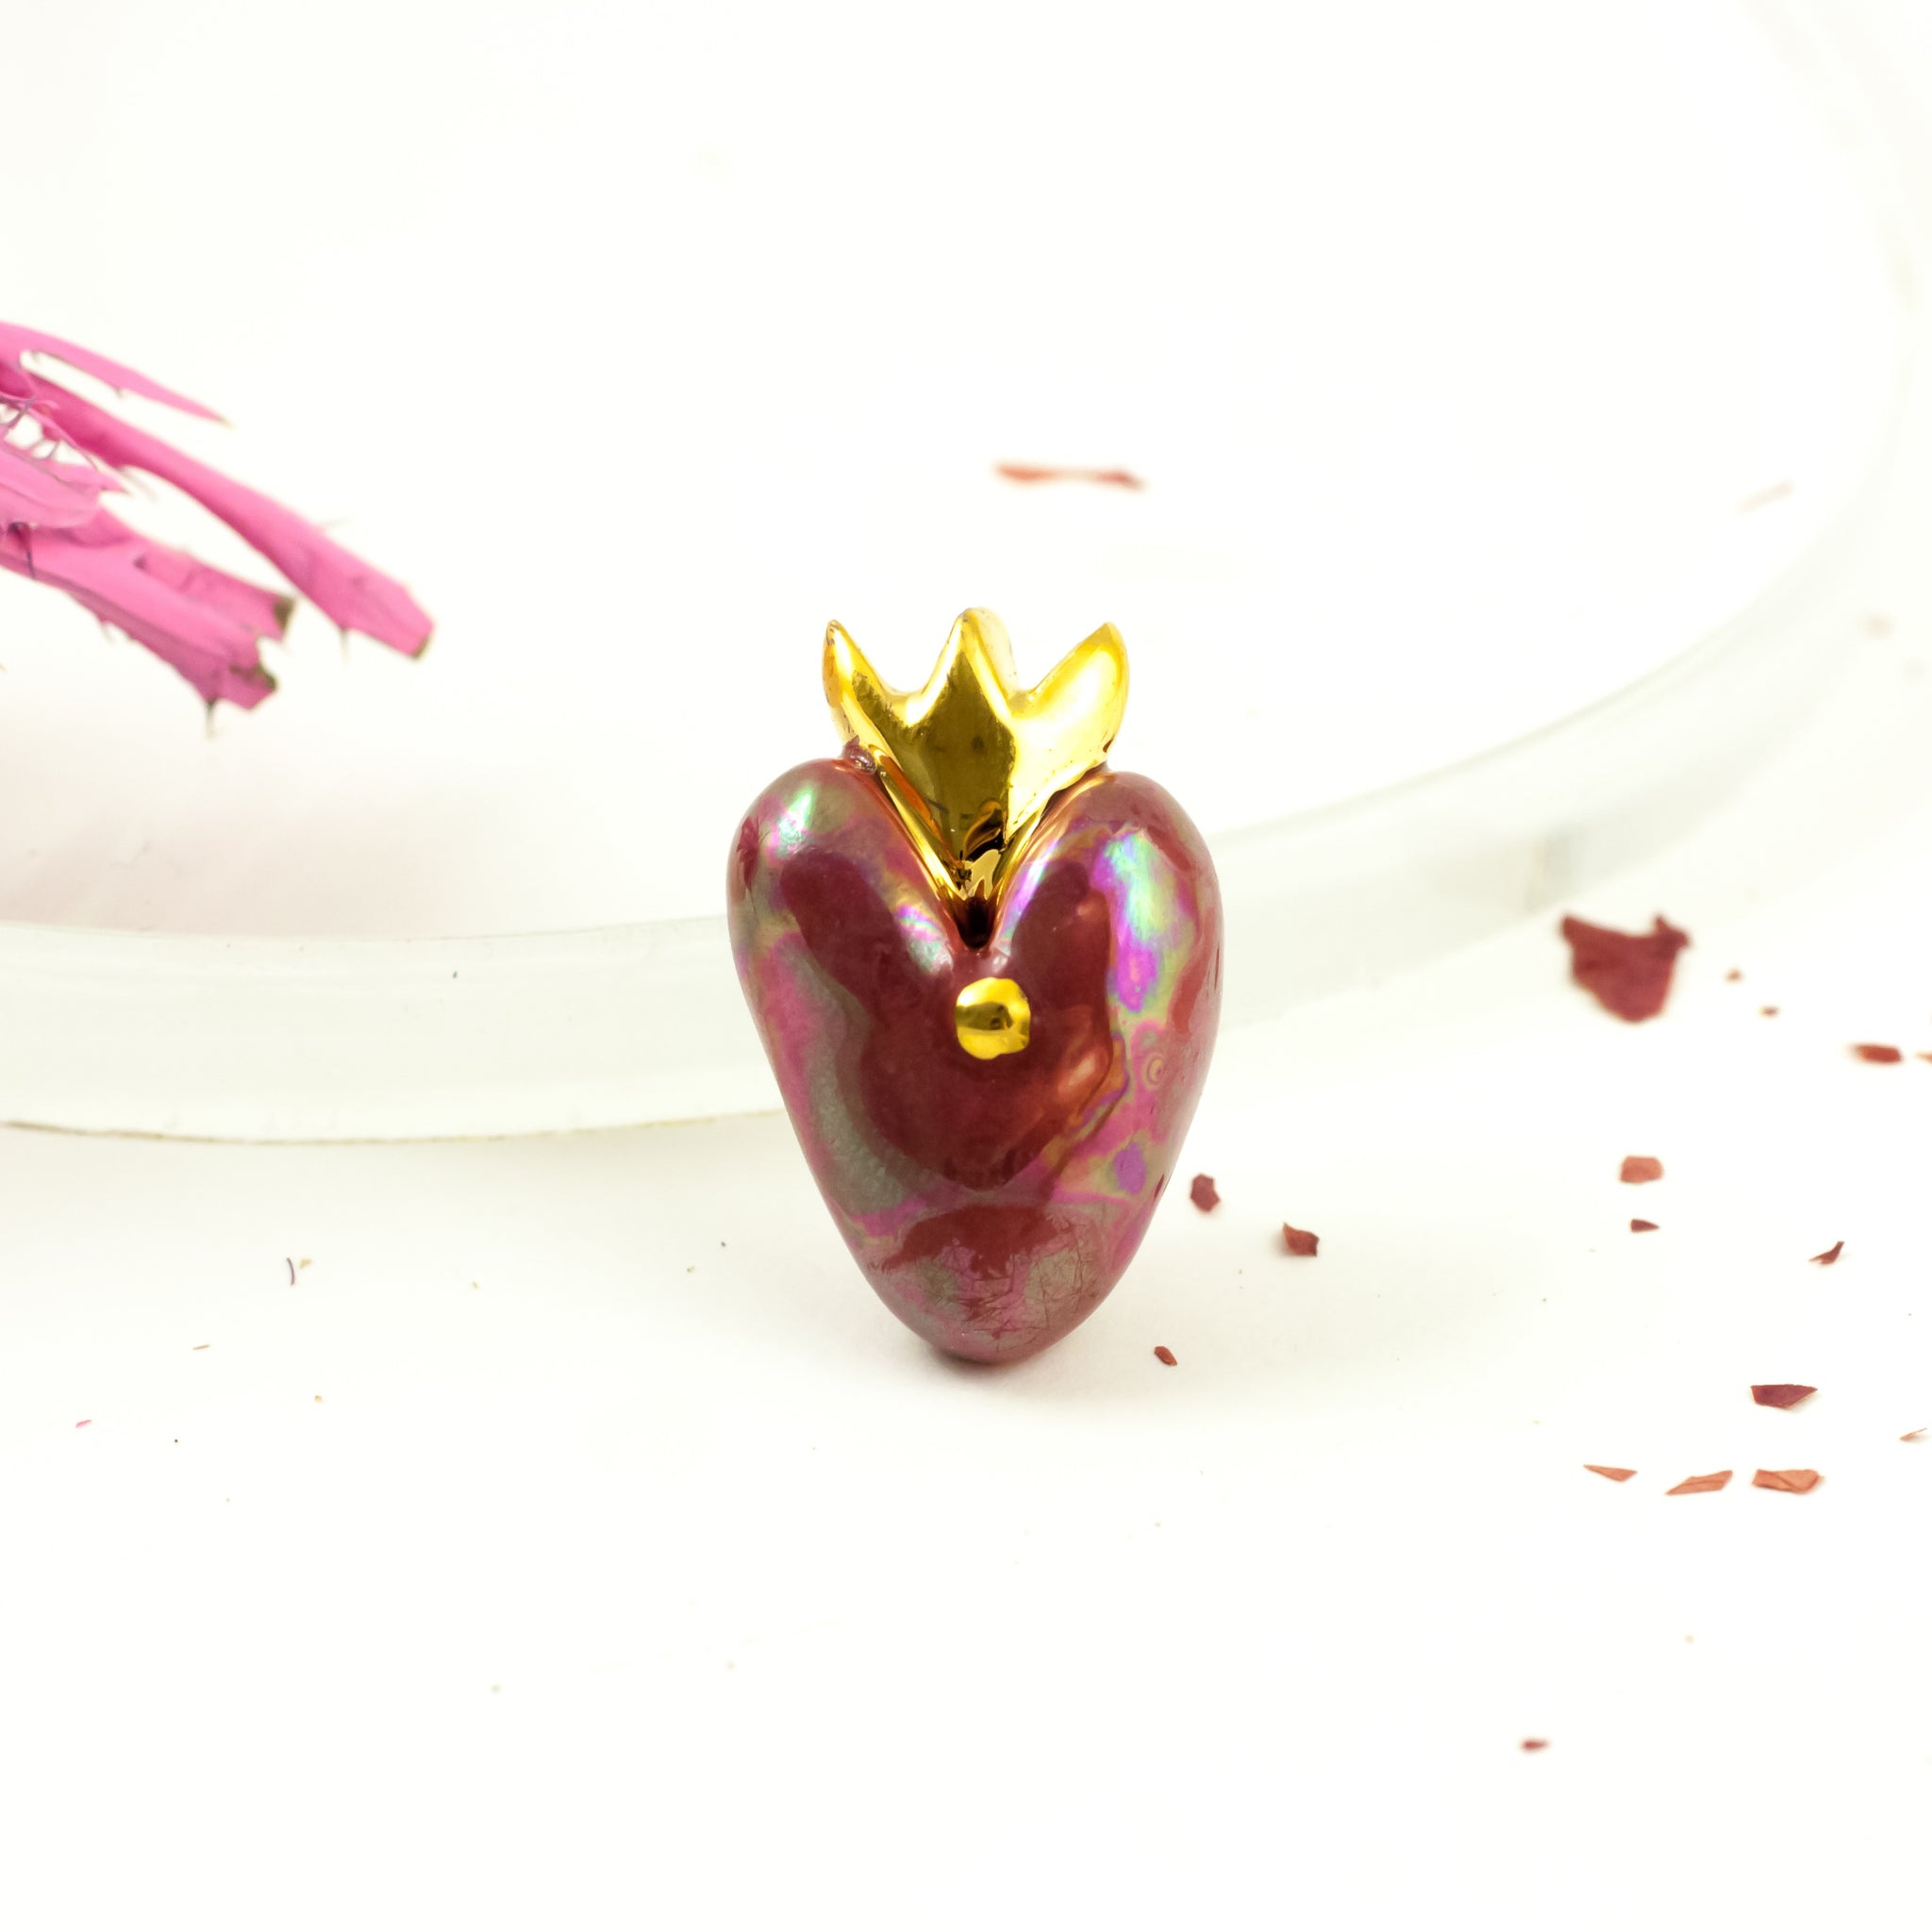 Dark red heart-shaped brooch with a crown and gold dot